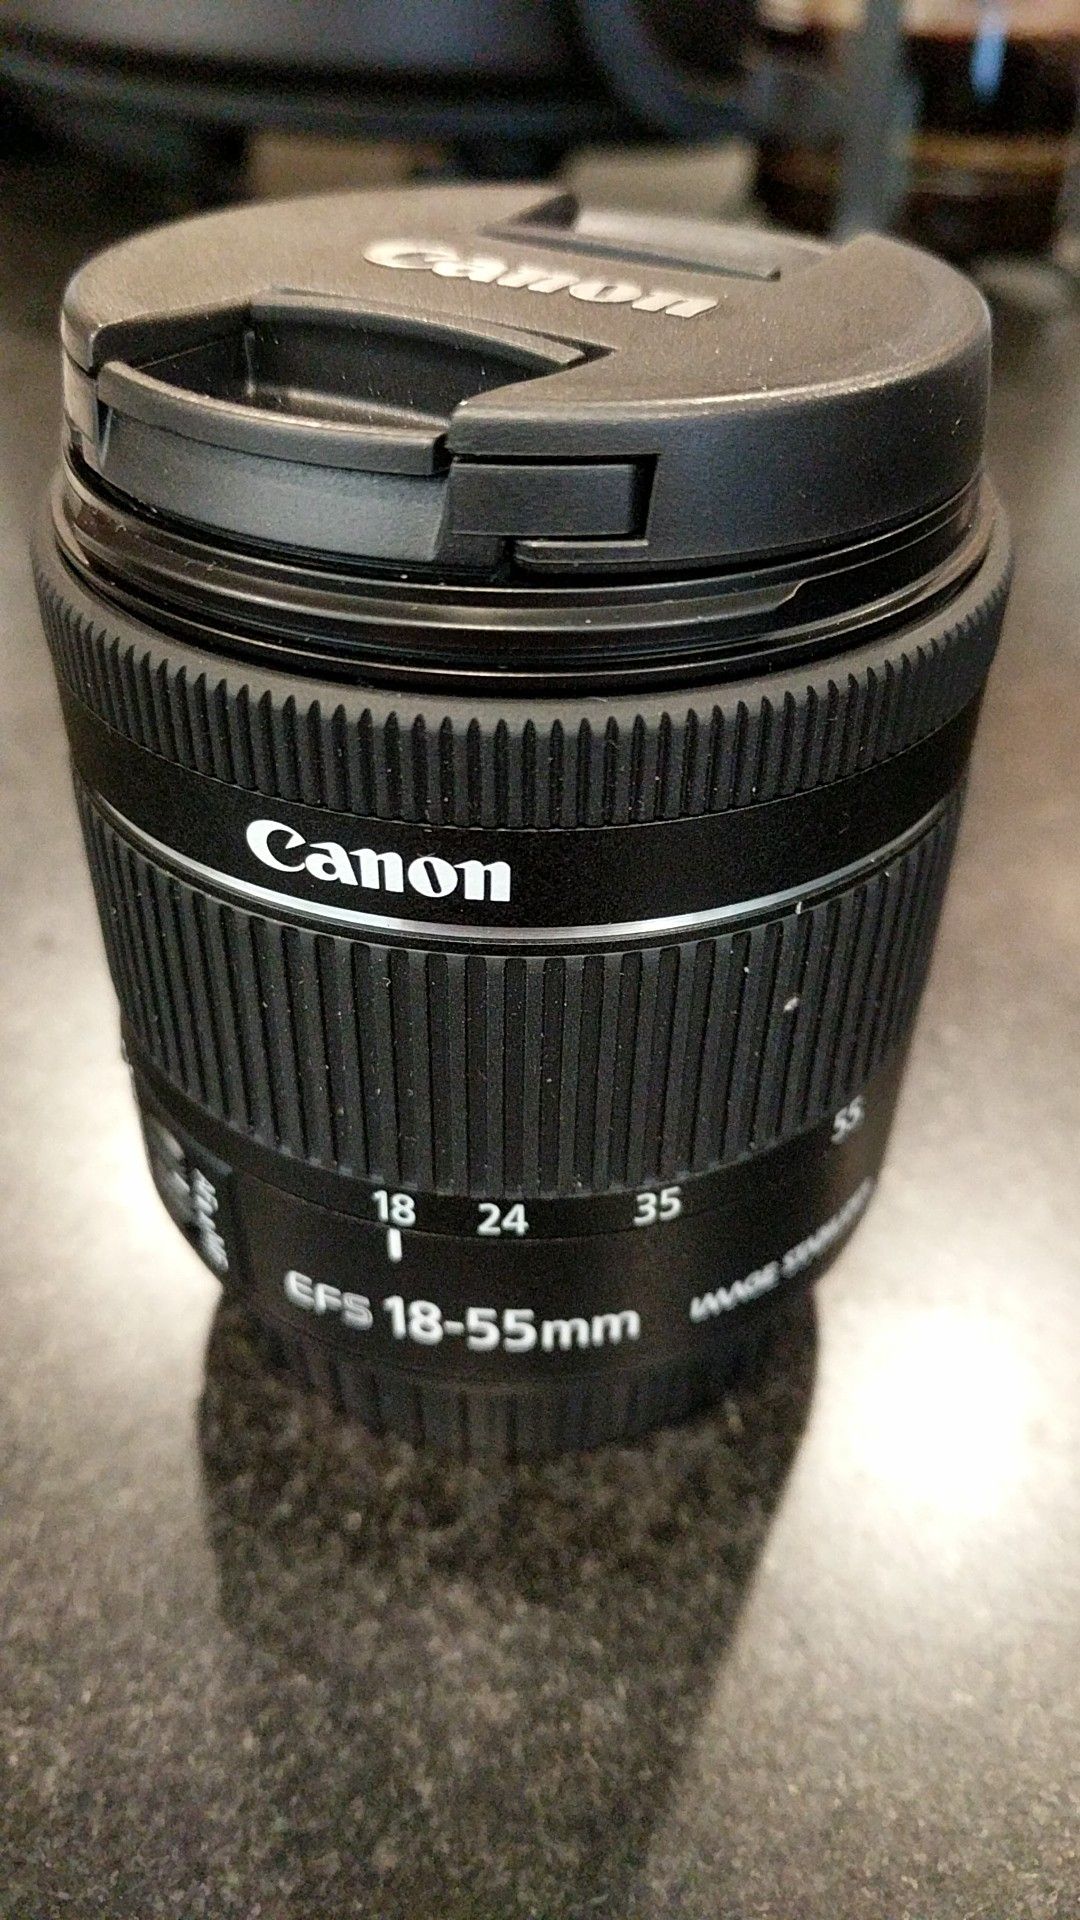 Canon 18-55mm EFS with Image Stabilization